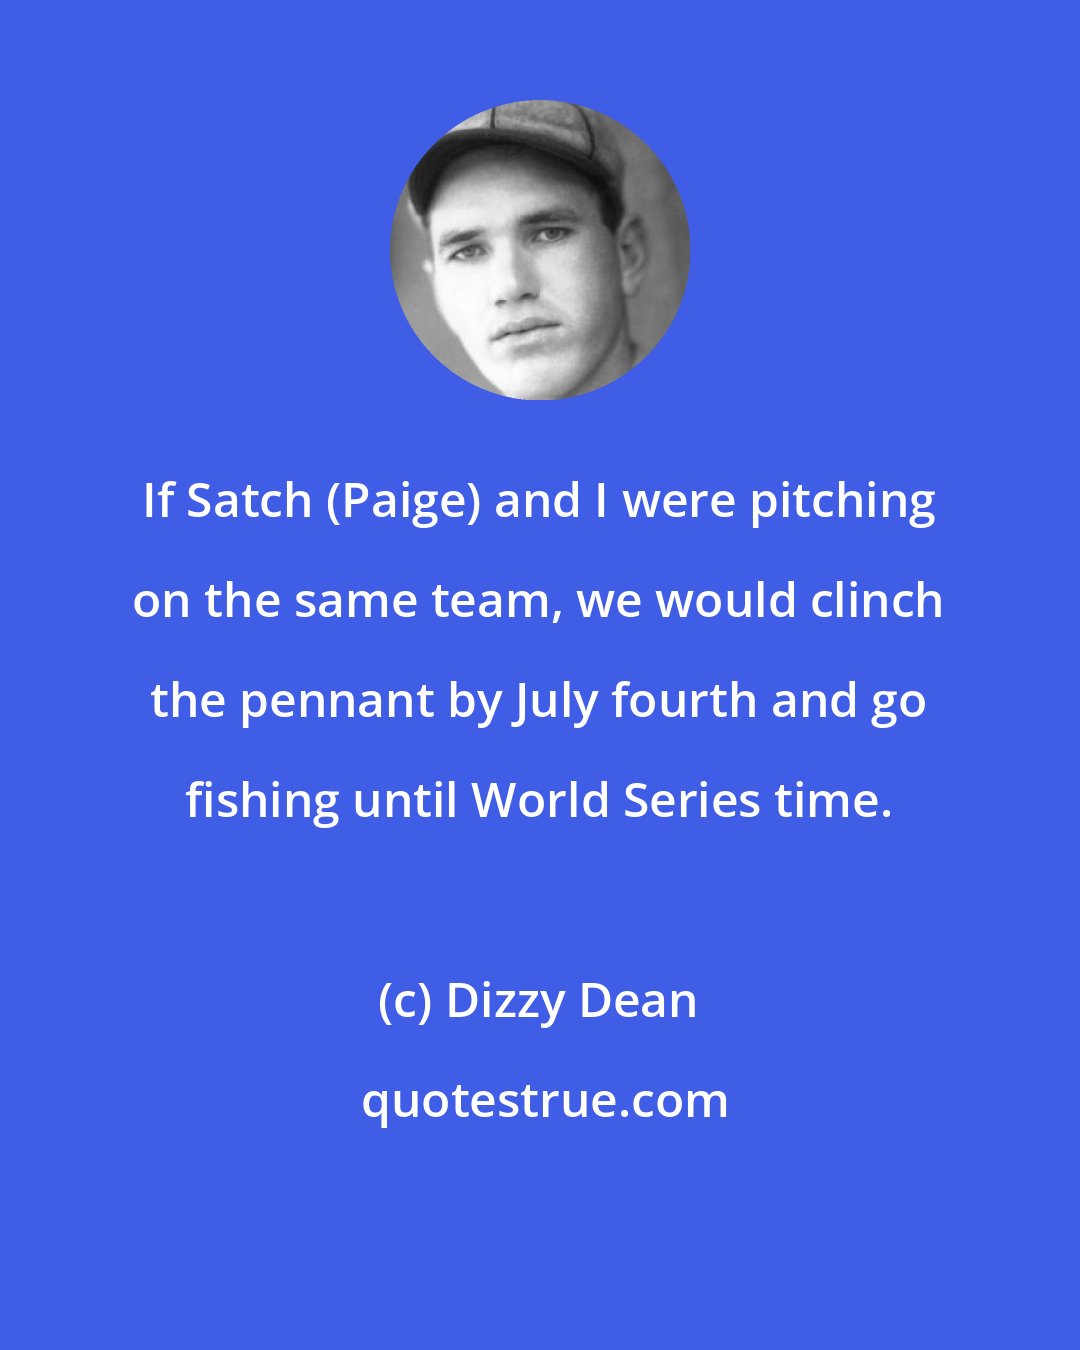 Dizzy Dean: If Satch (Paige) and I were pitching on the same team, we would clinch the pennant by July fourth and go fishing until World Series time.